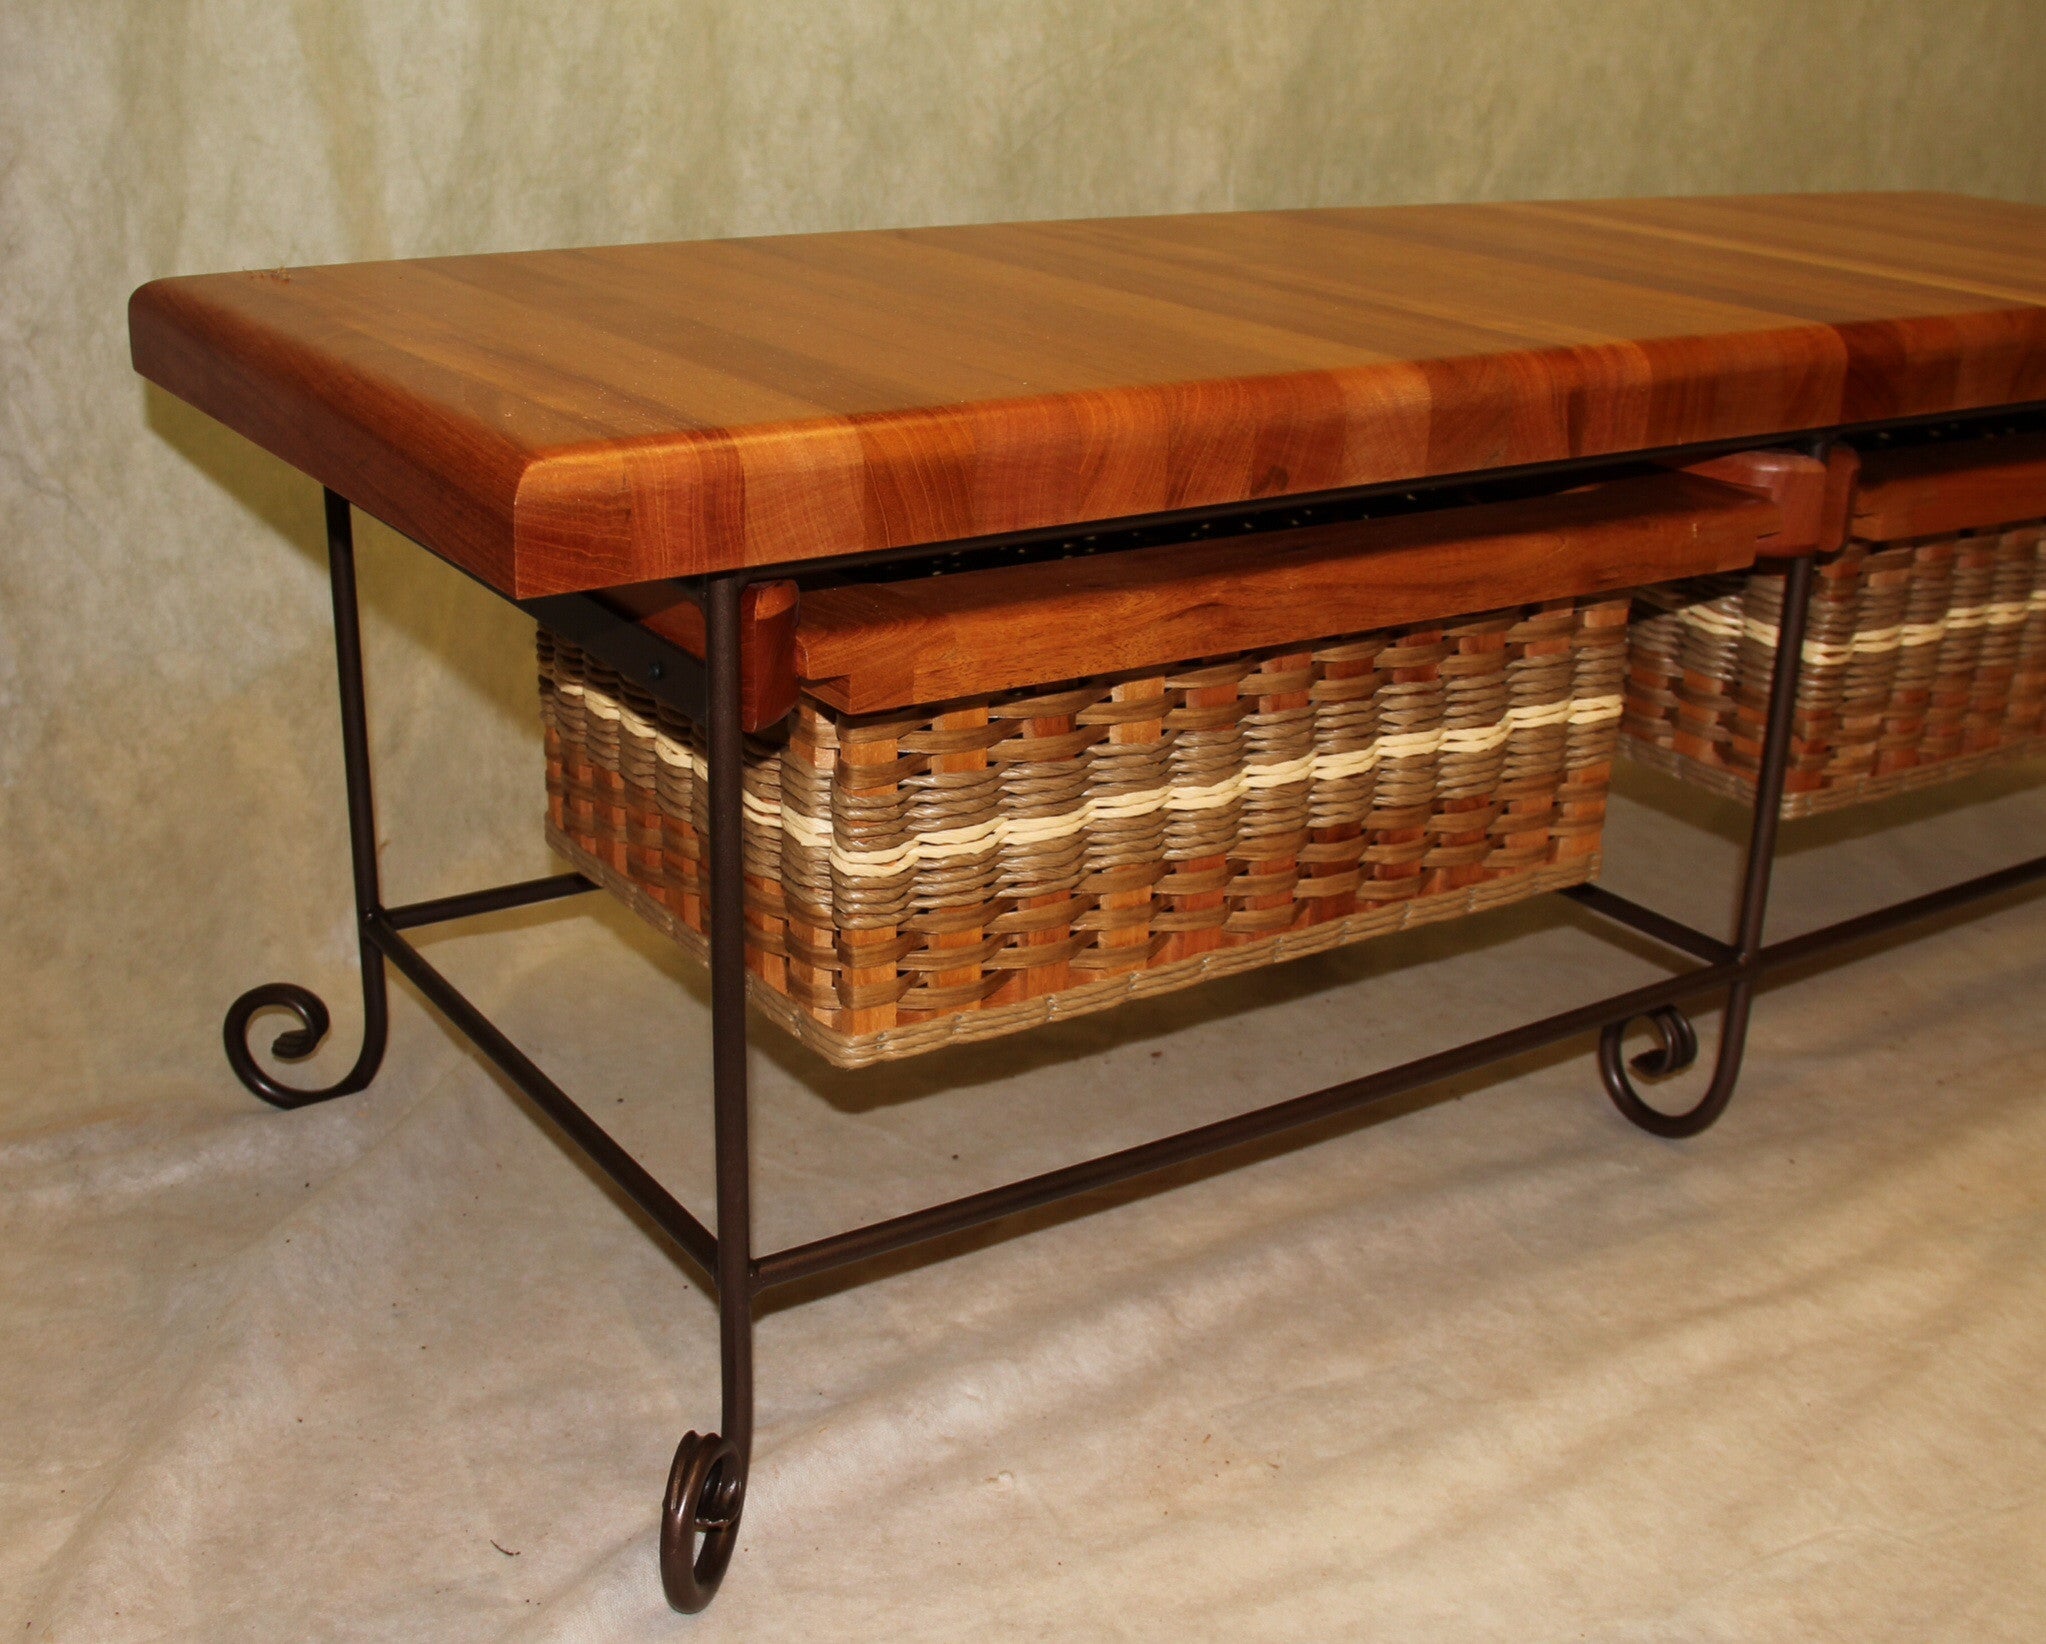 Table-19x52 Coffee Table/Bench